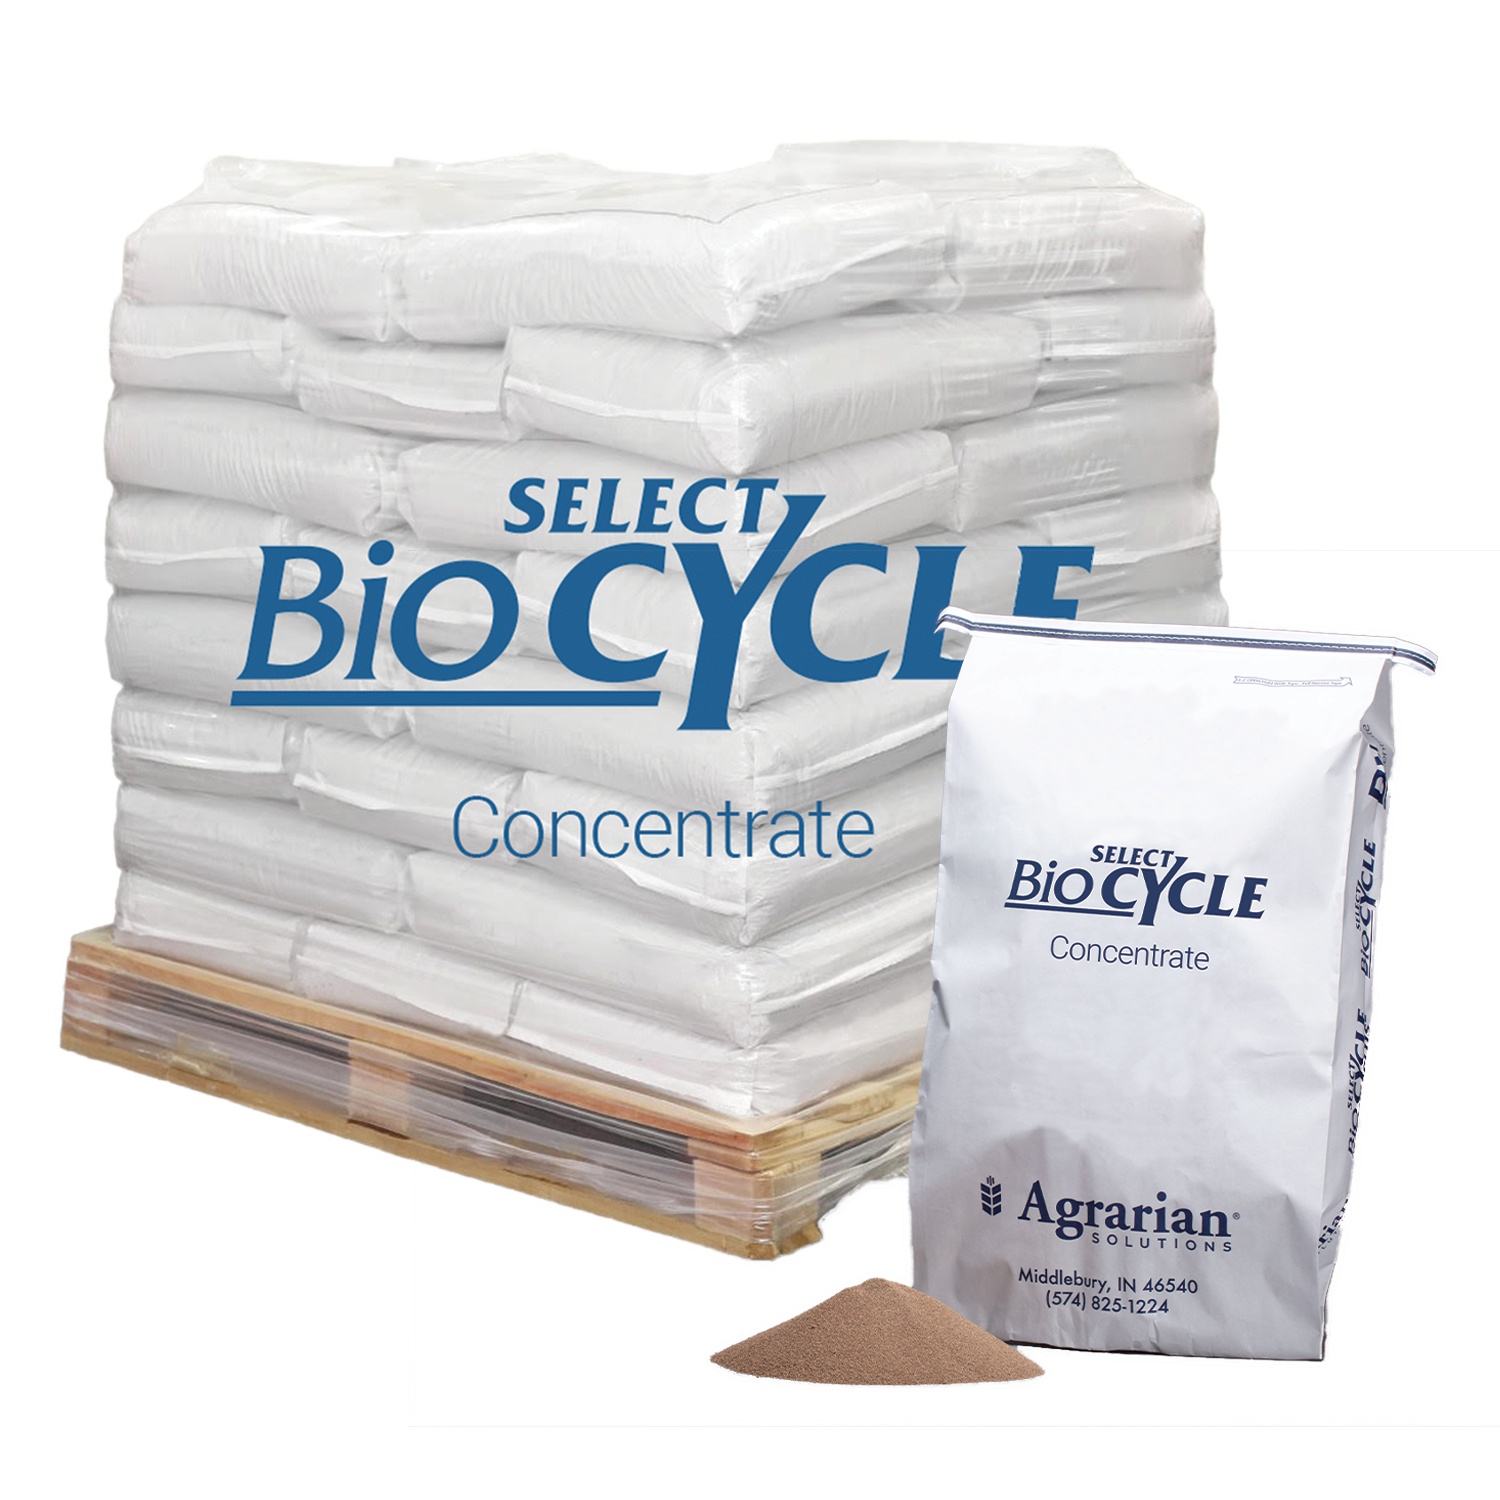 SelectBioCycleConcentrate